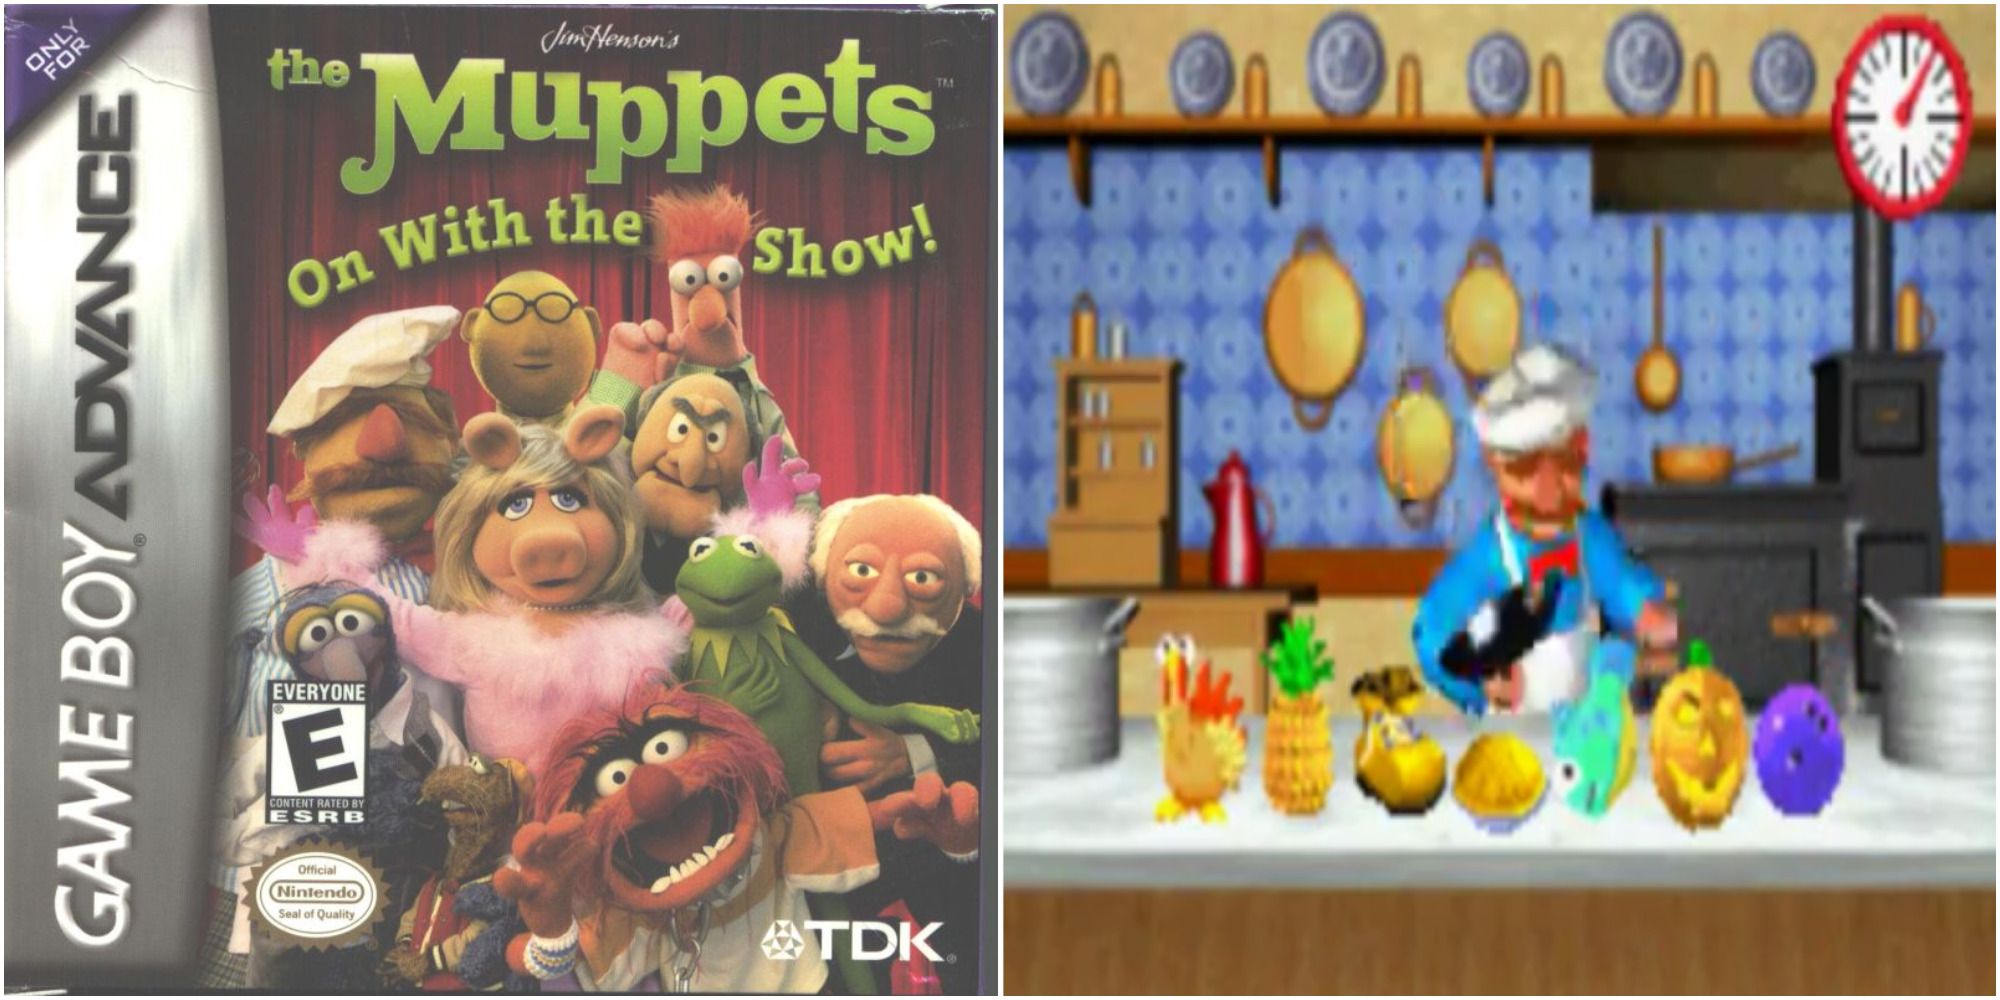 Split image The Muppets On With The Show! GBA Cover featuring the Muppet Show cast and gameplay of the Swedish Chef Hour minigame